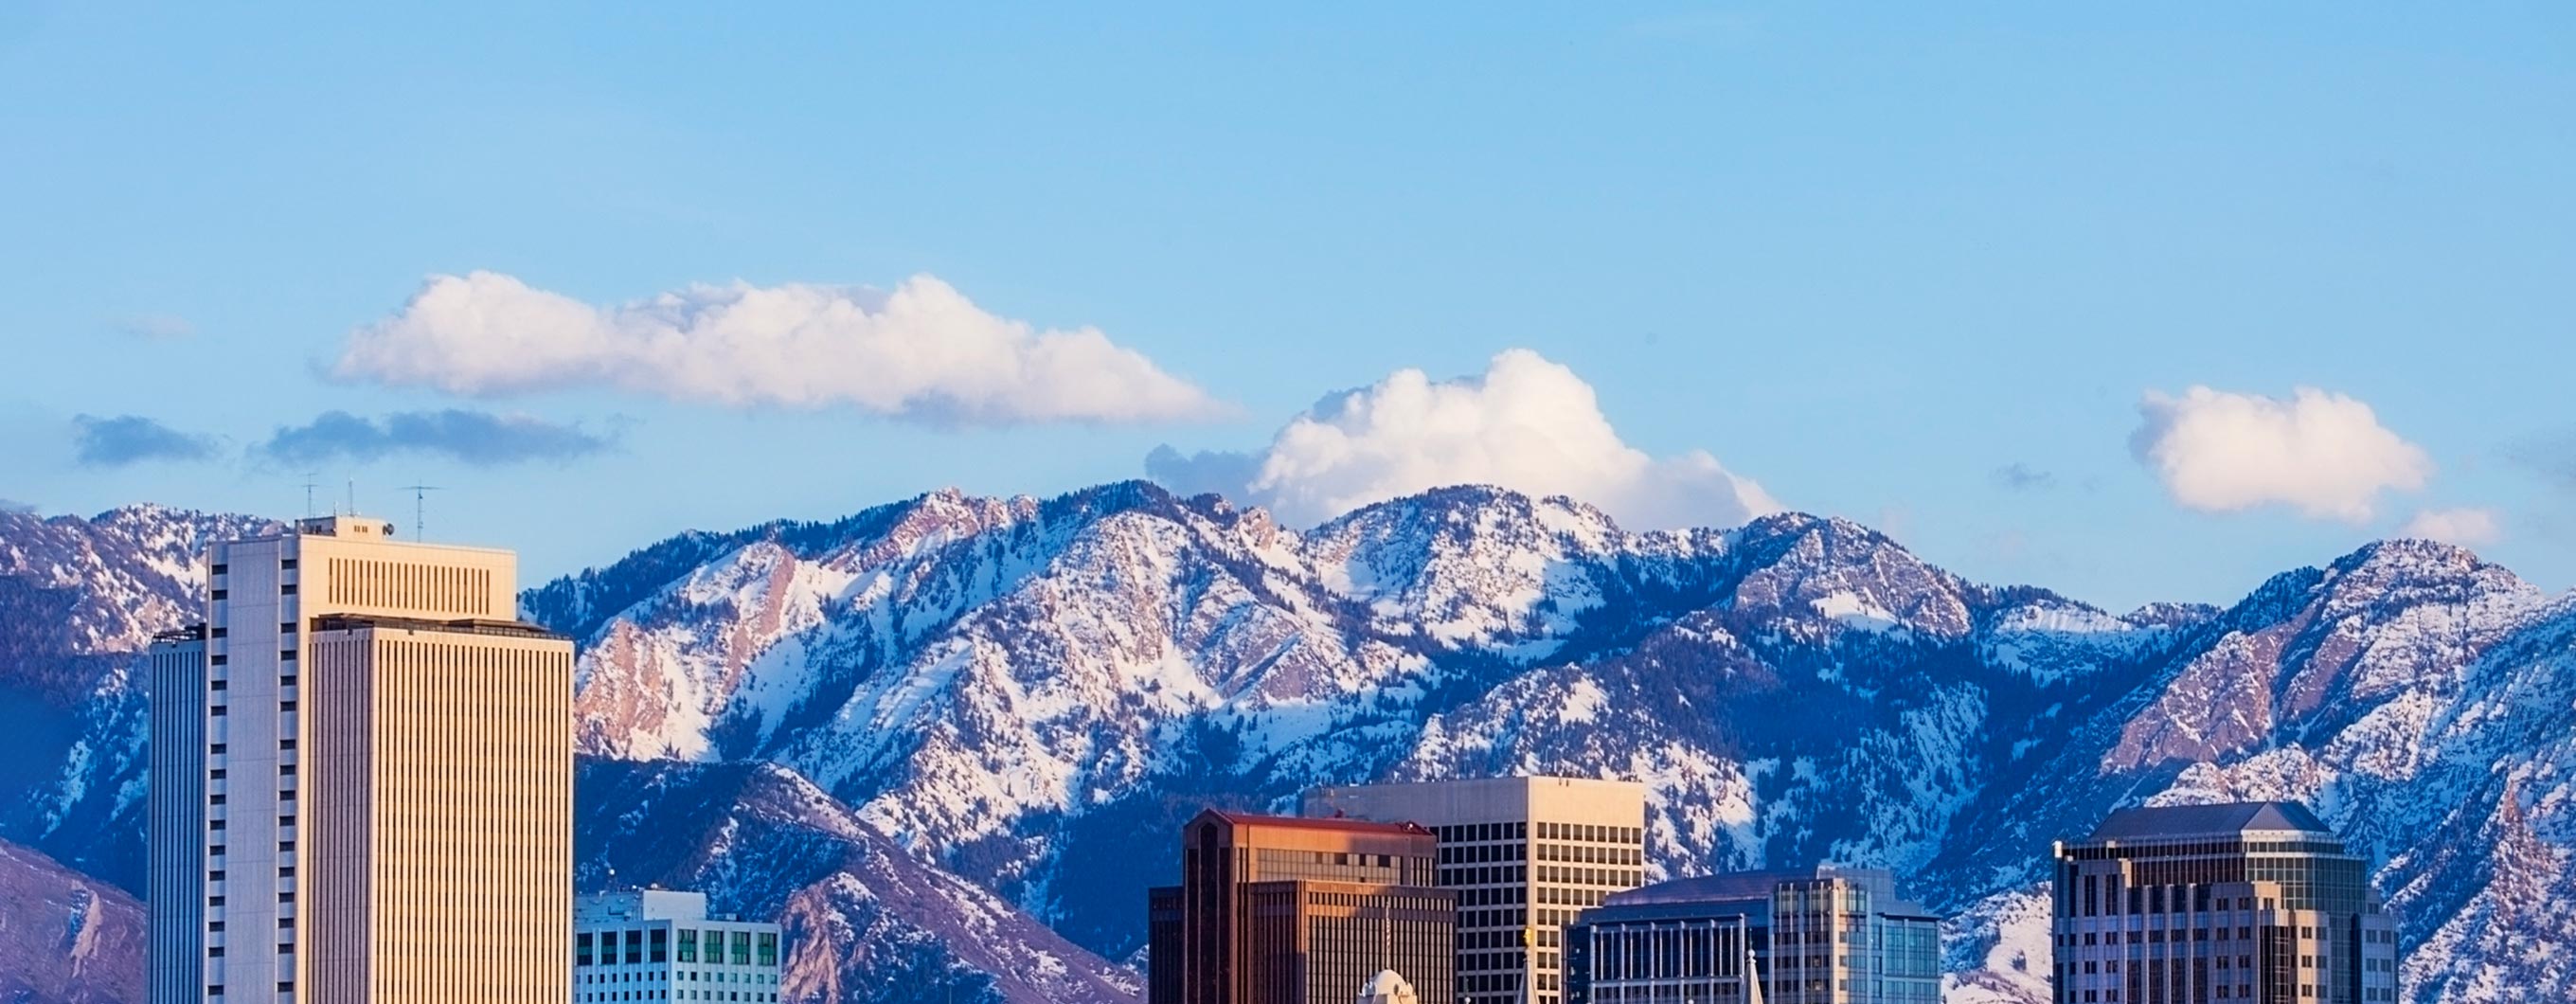 Image of the tops of buildings in Salt Lake City with the mountains behind them